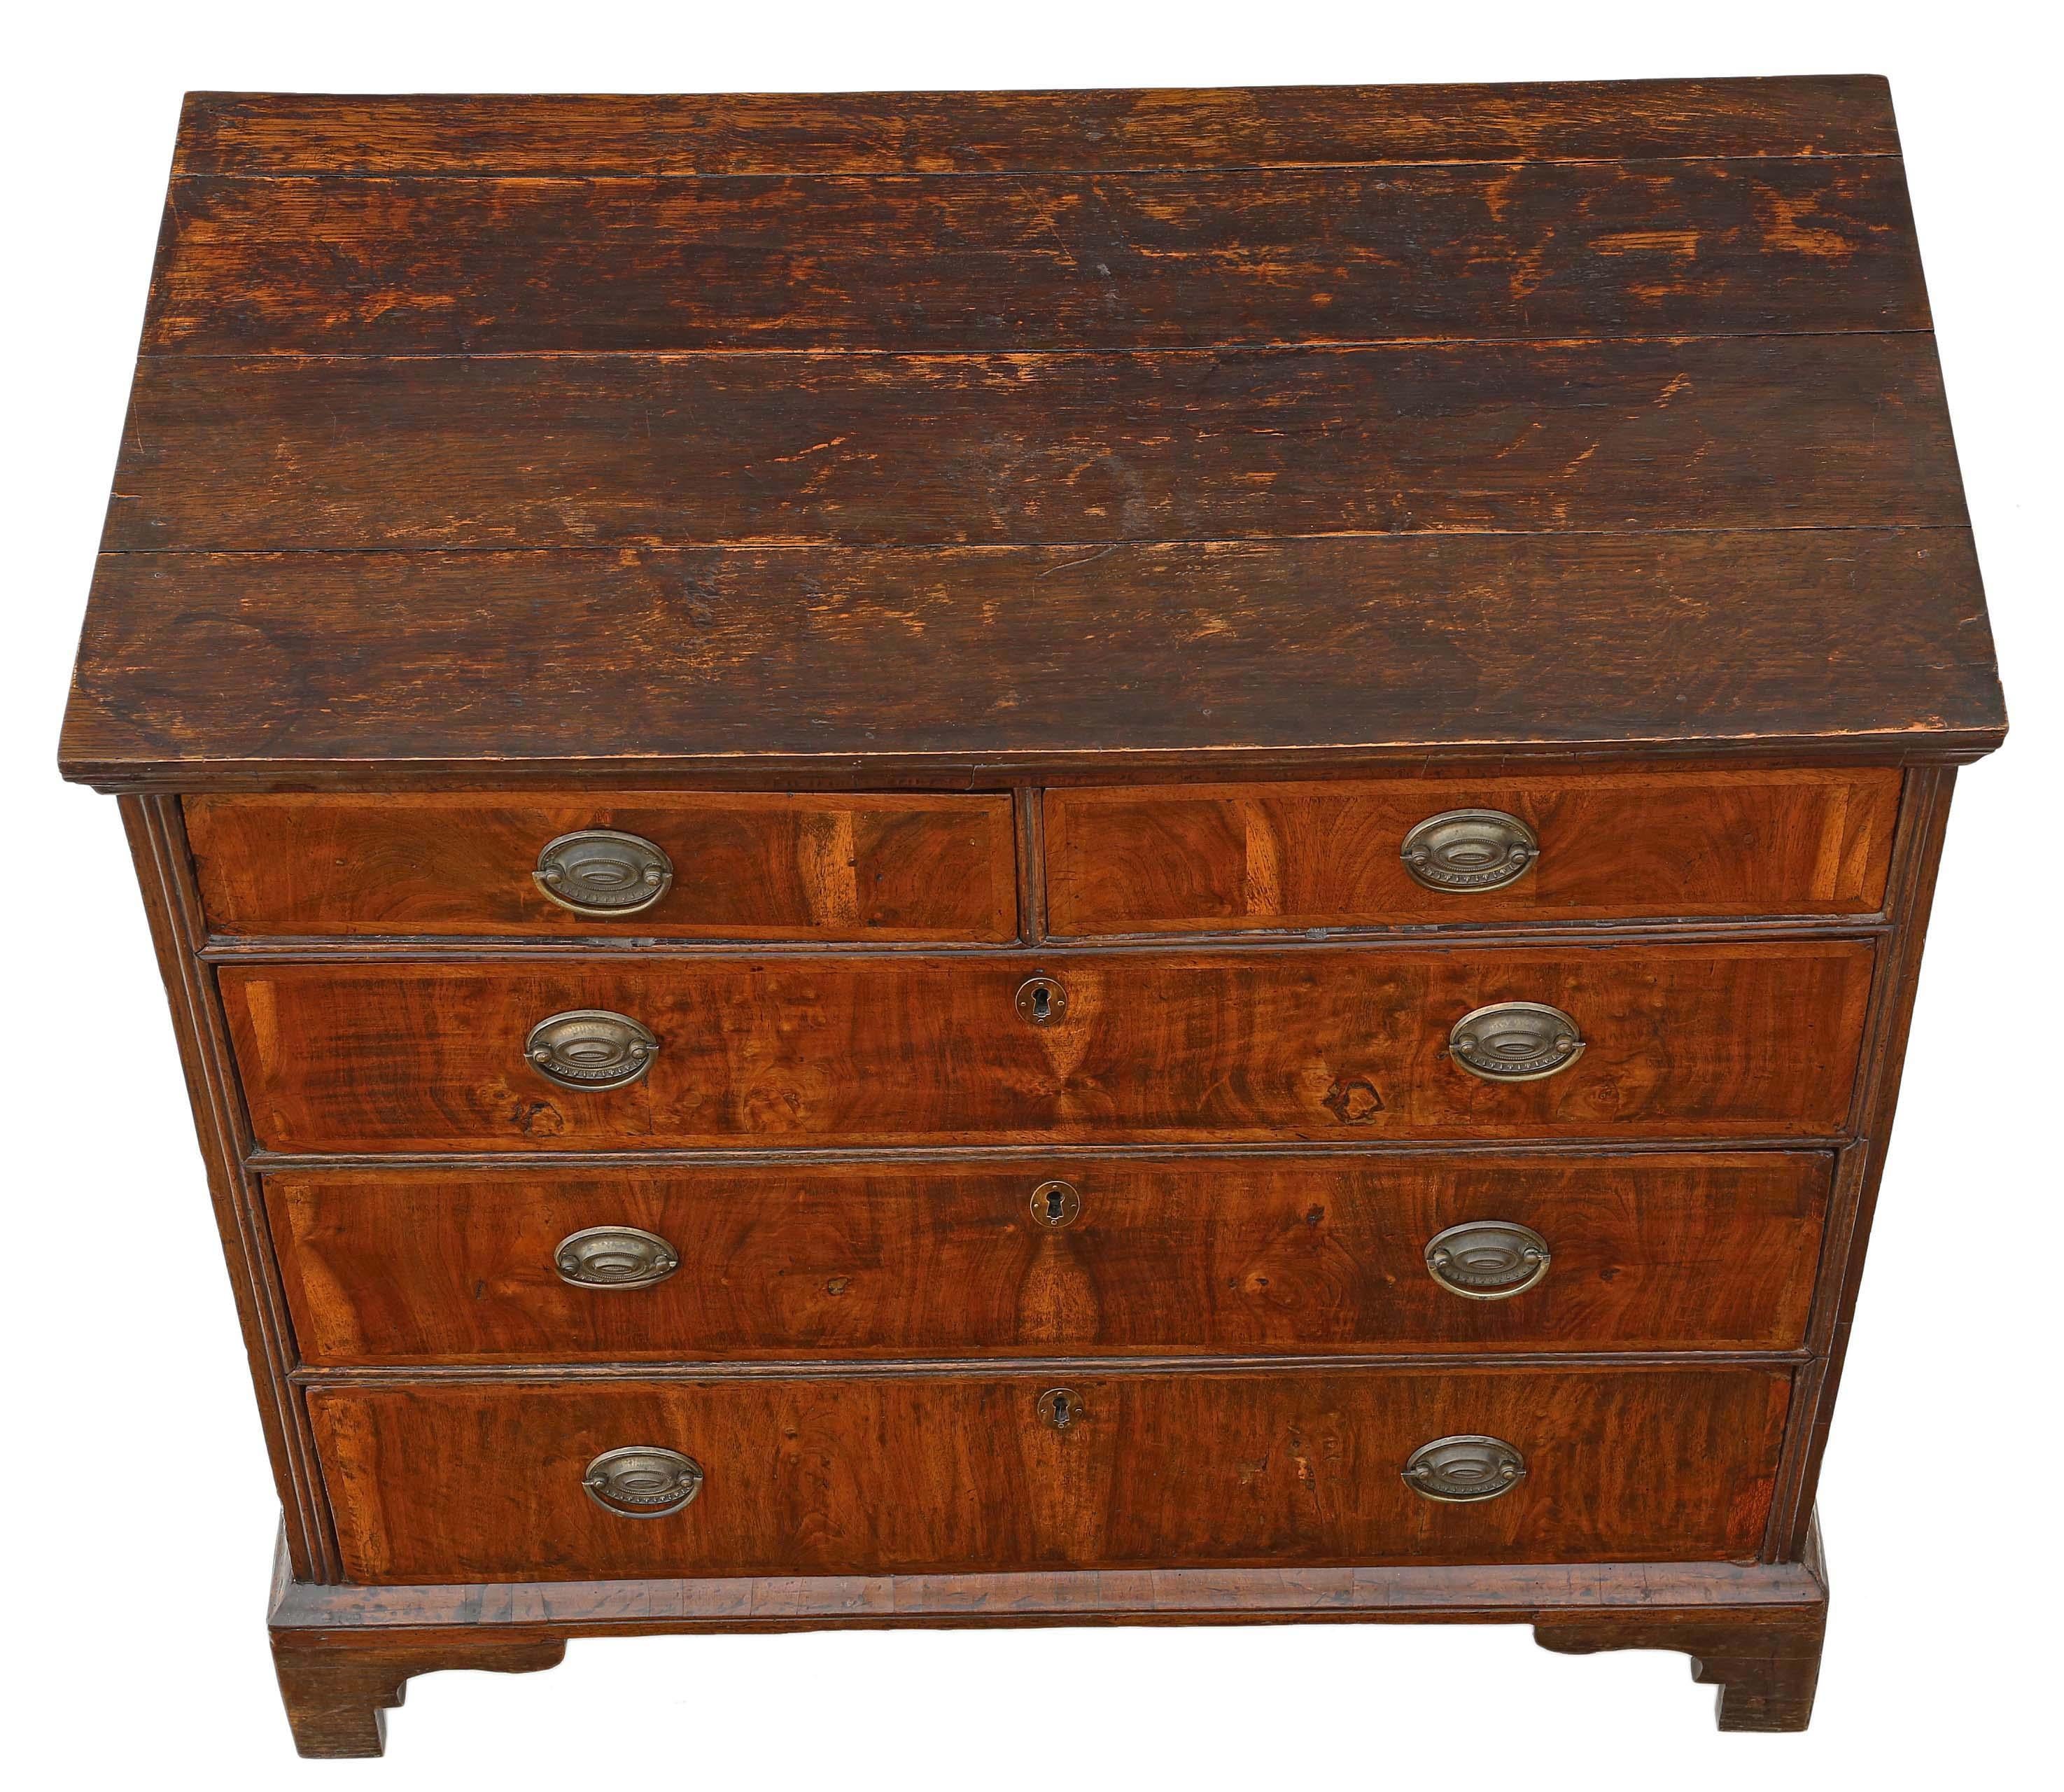 Classic Georgian Chest of Drawers in Walnut and Oak with Crossbanding In Good Condition For Sale In Wisbech, Cambridgeshire